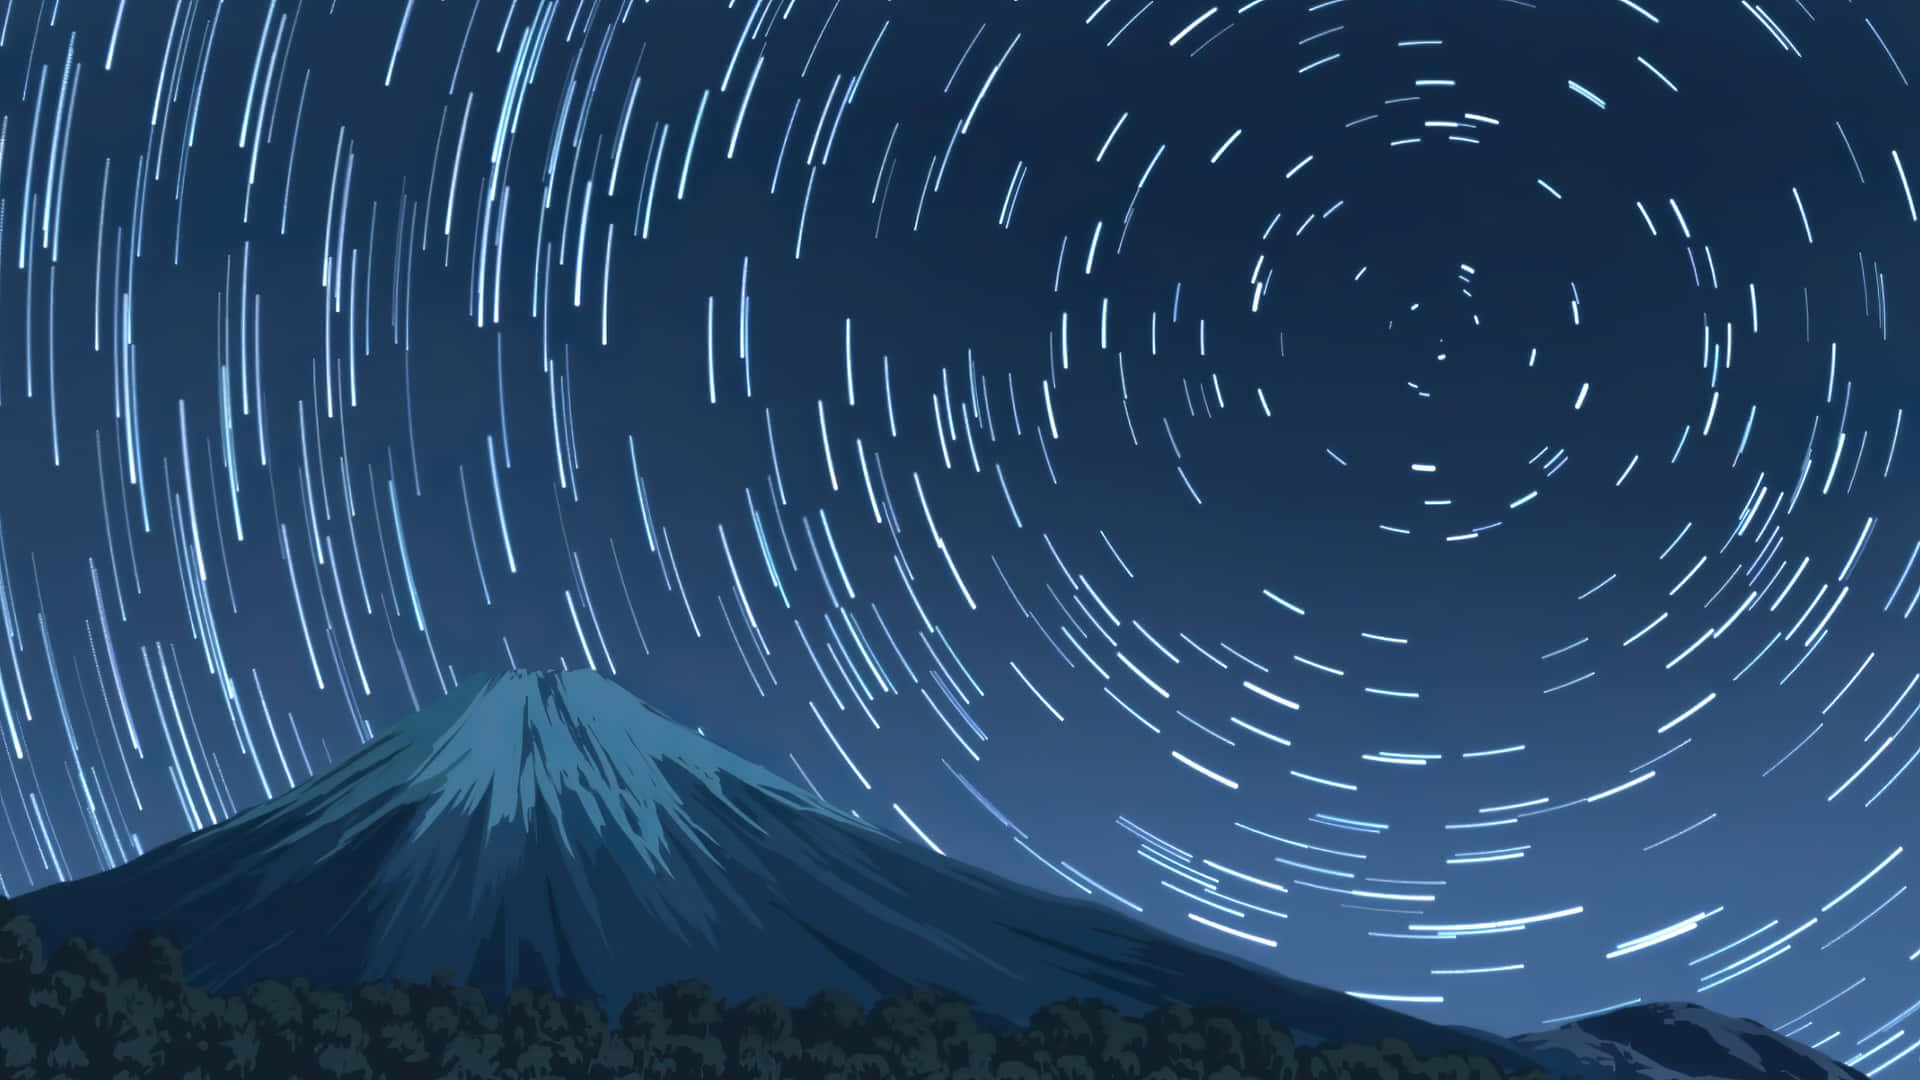 Camp Camp Mountain And Star Trails